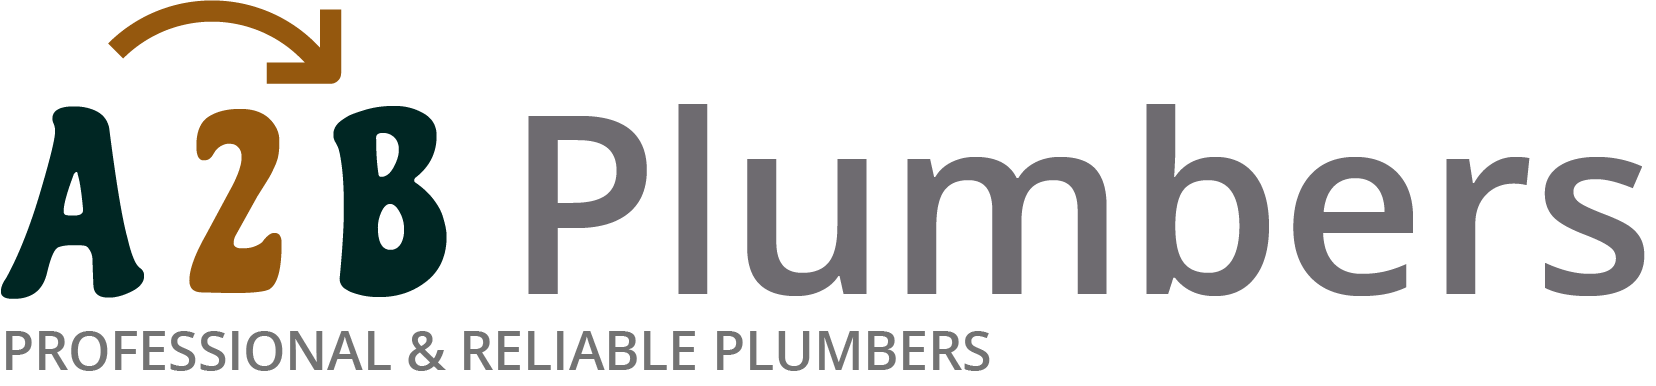 If you need a boiler installed, a radiator repaired or a leaking tap fixed, call us now - we provide services for properties in Stourport On Severn and the local area.